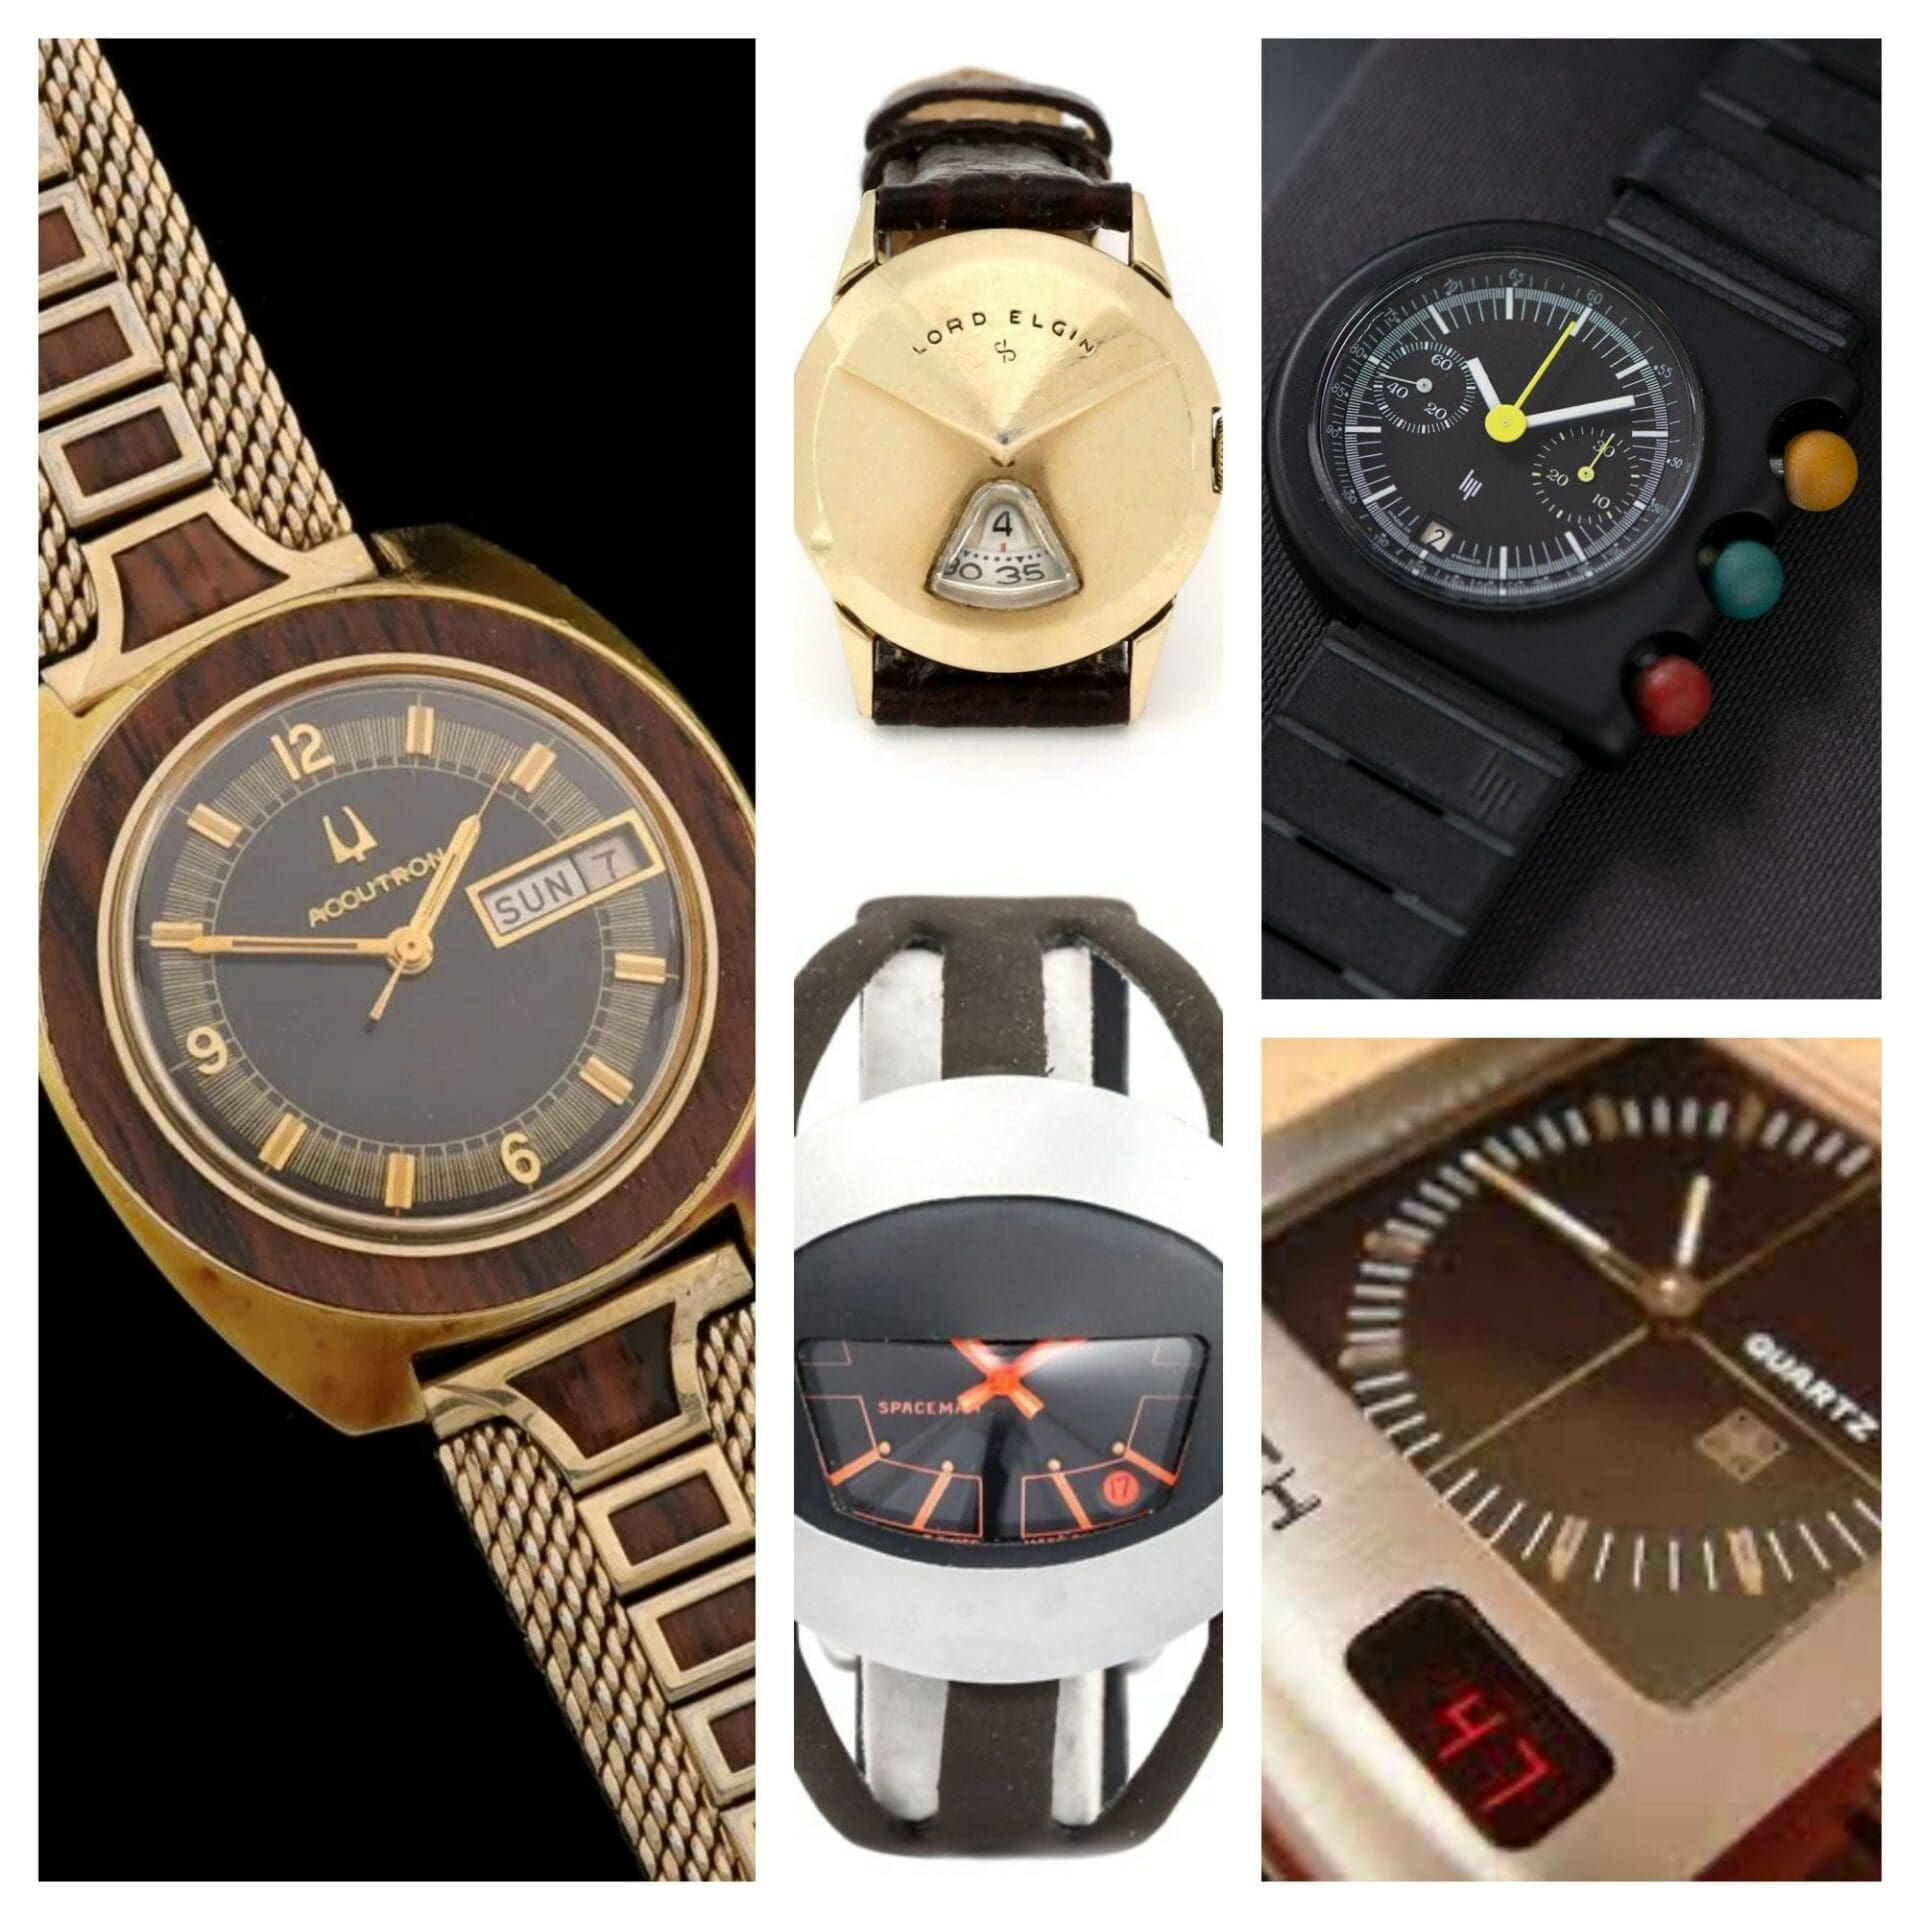 5 vintage watches that are so uncool, they’re actually amazing